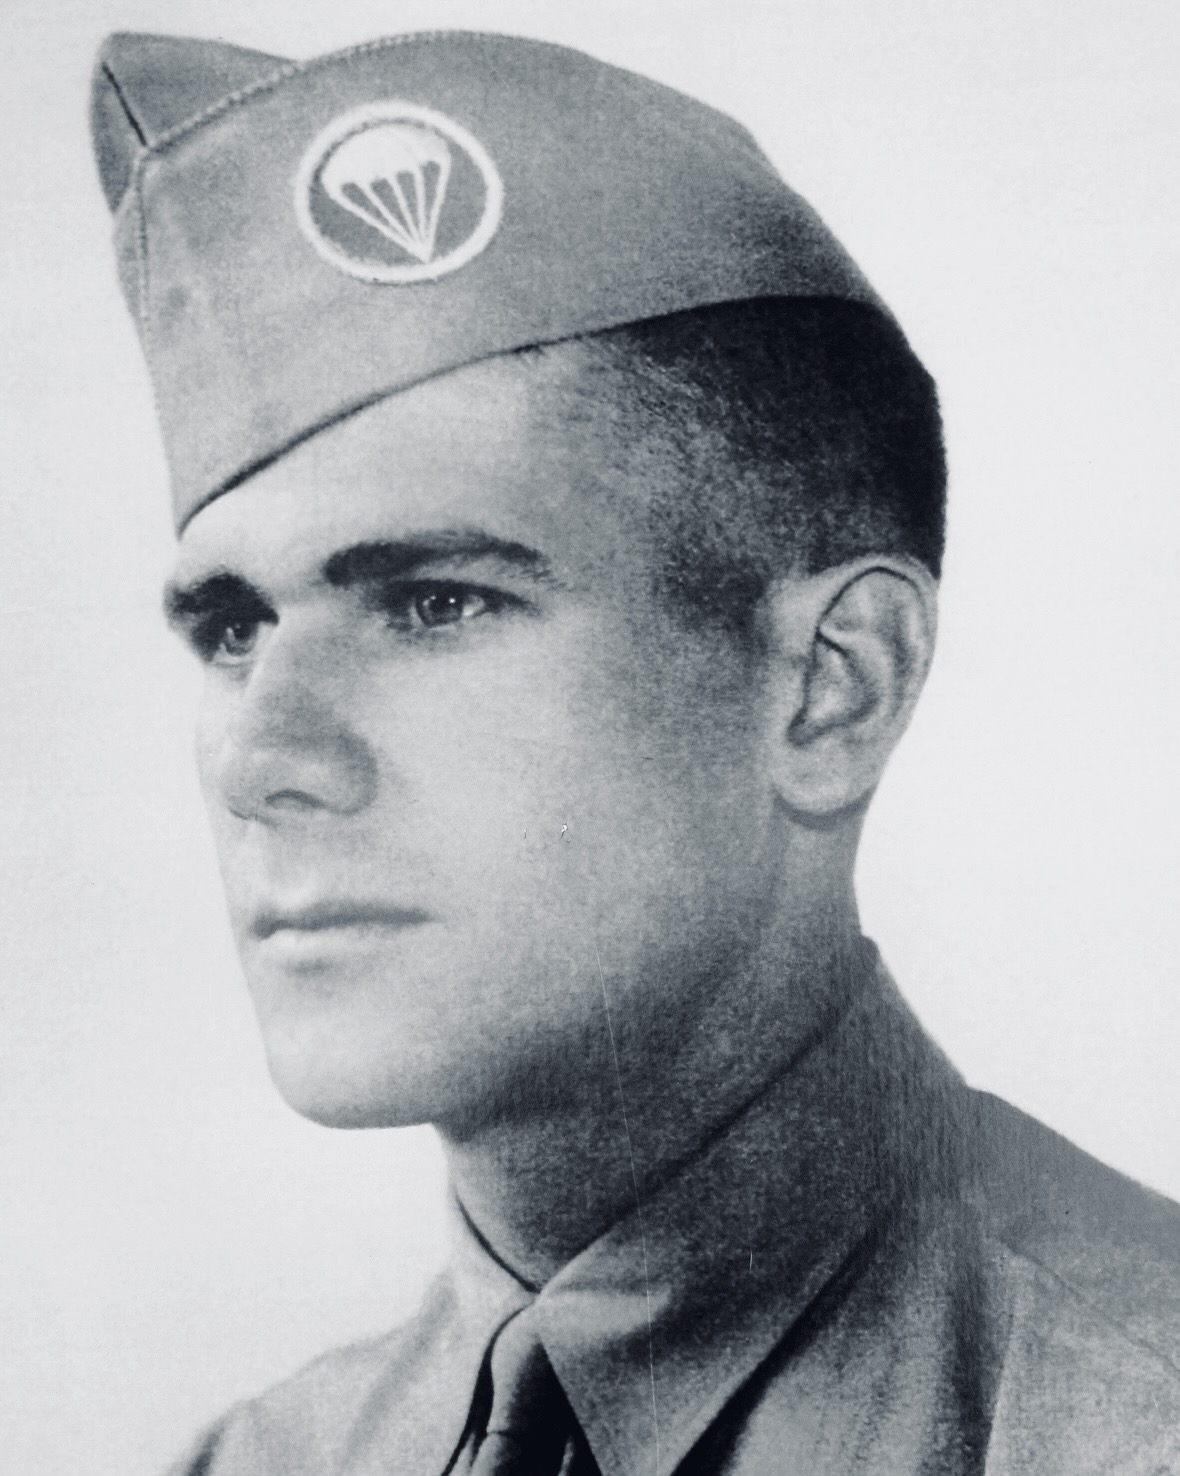 Black-and-white portrait of a man in a military uniform wearing a cap with a parachute insignia, looking to the side.